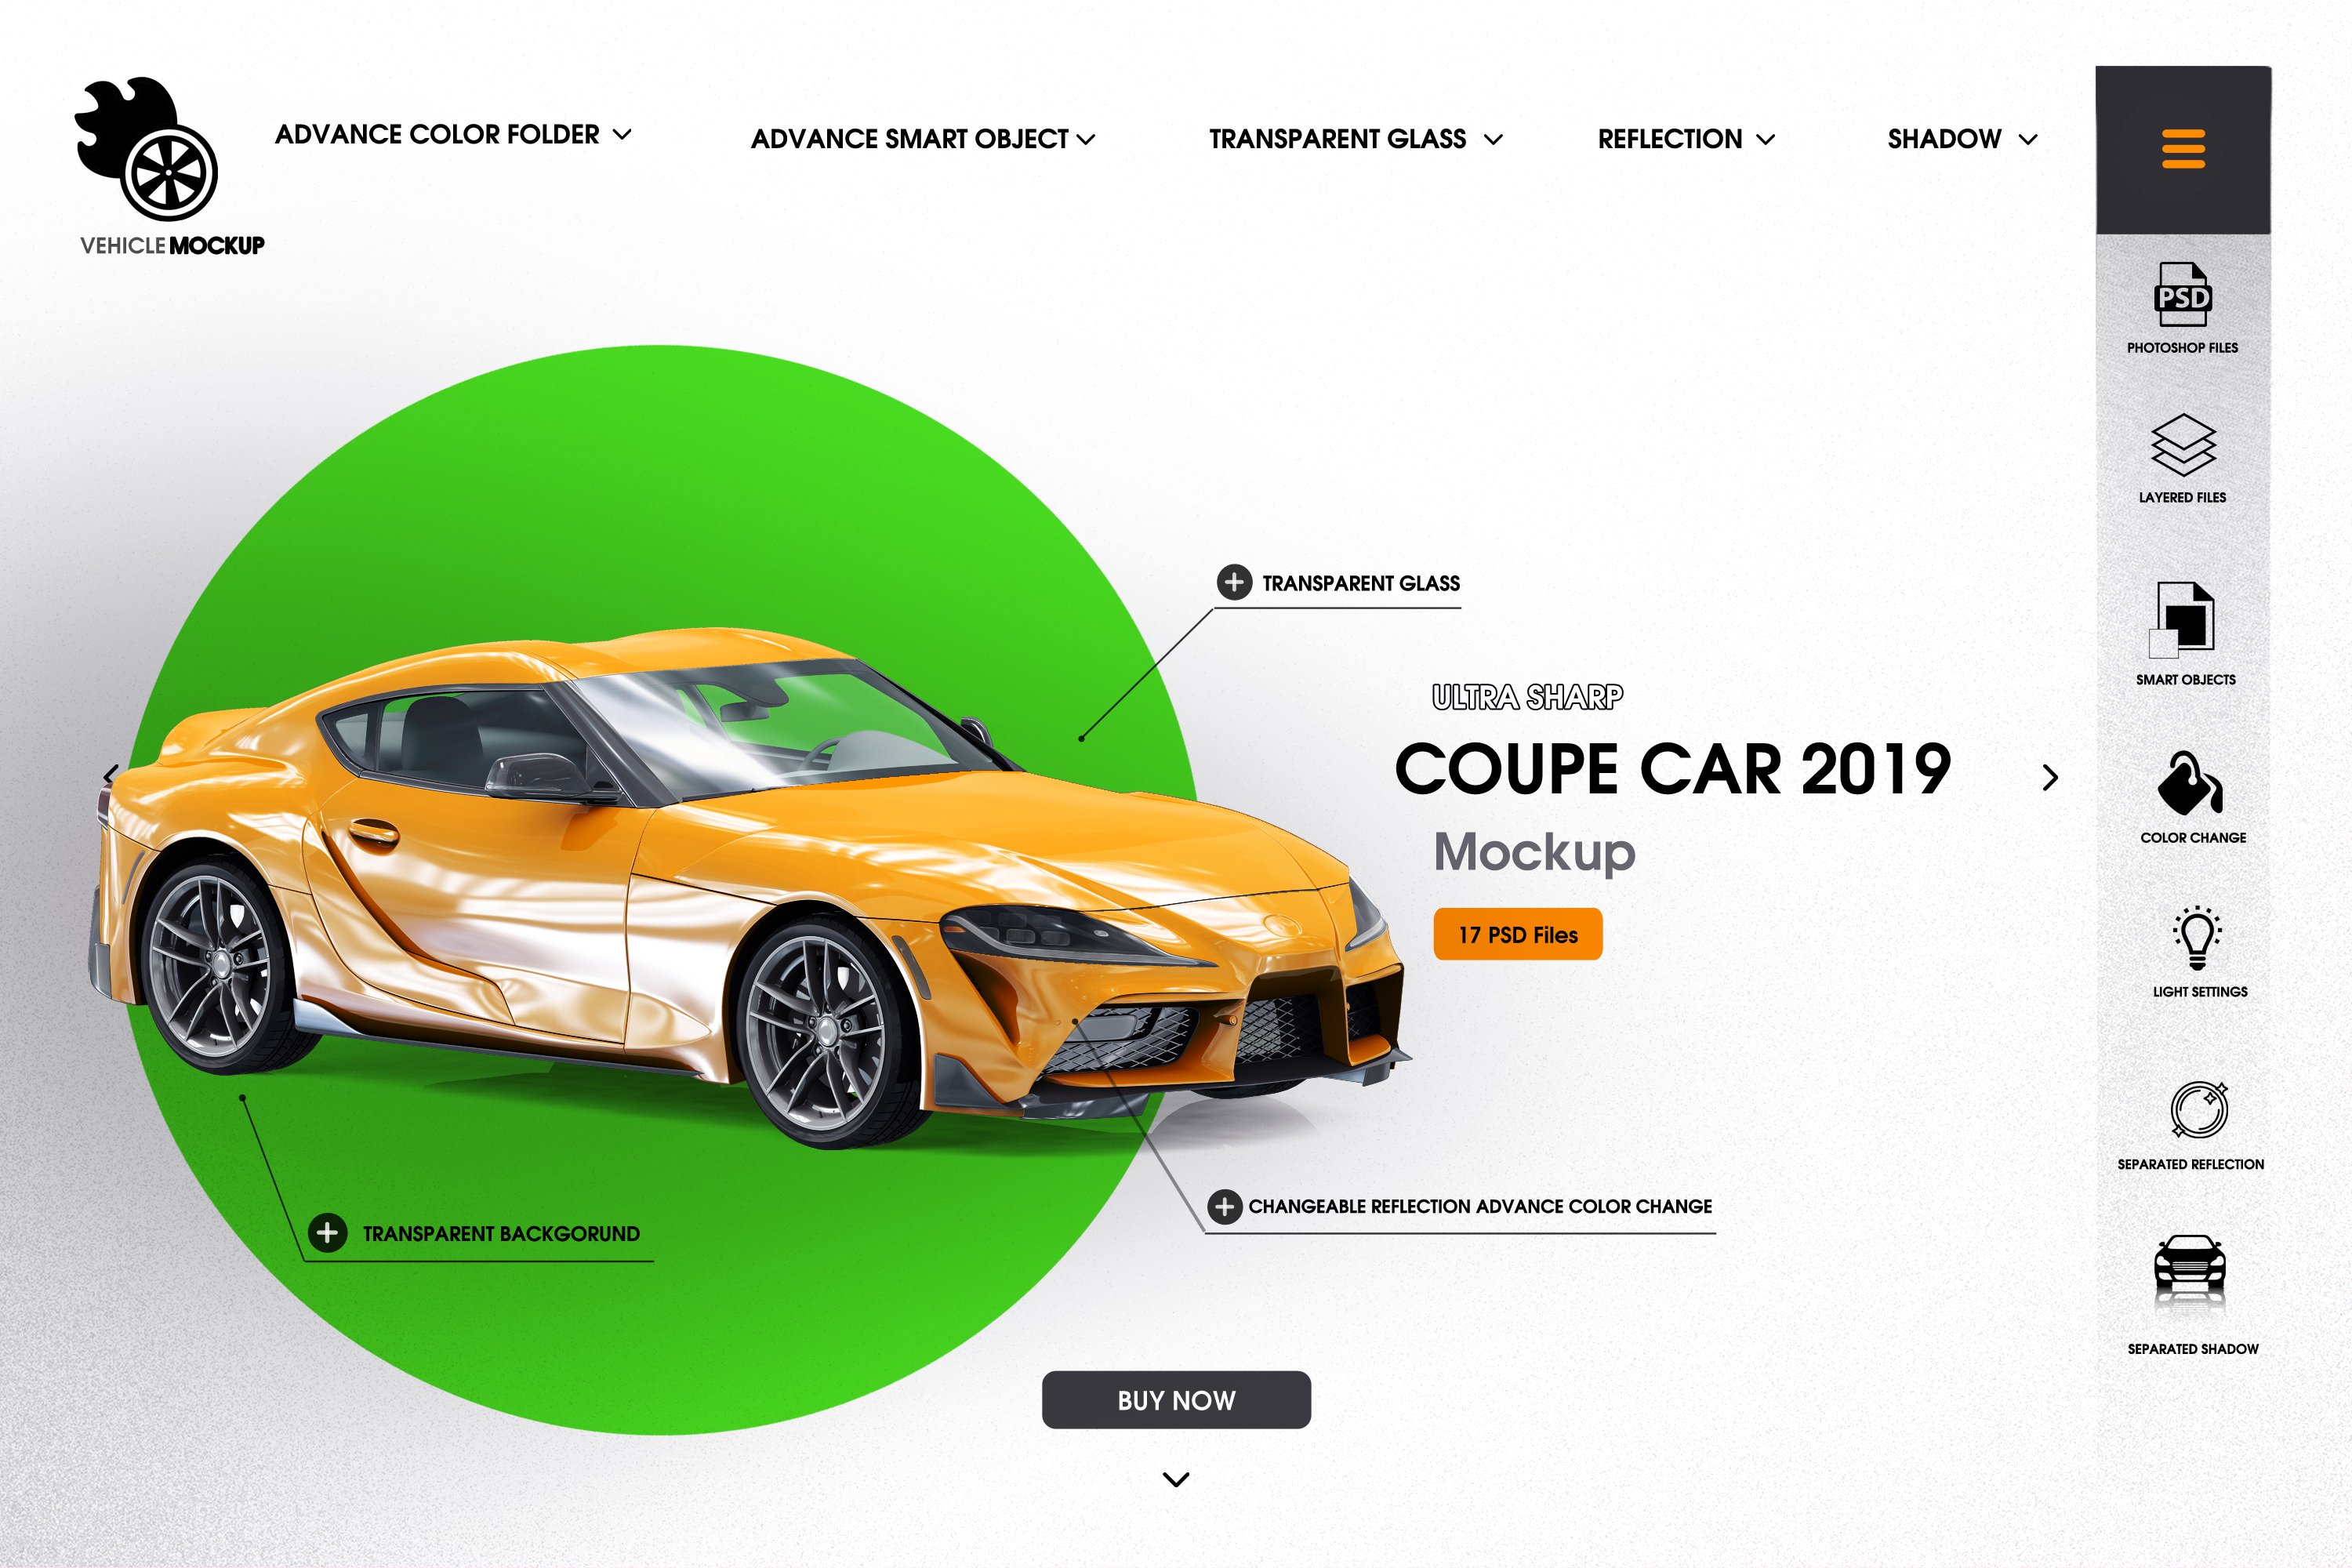 Coupe car 2019 mockup cover image.